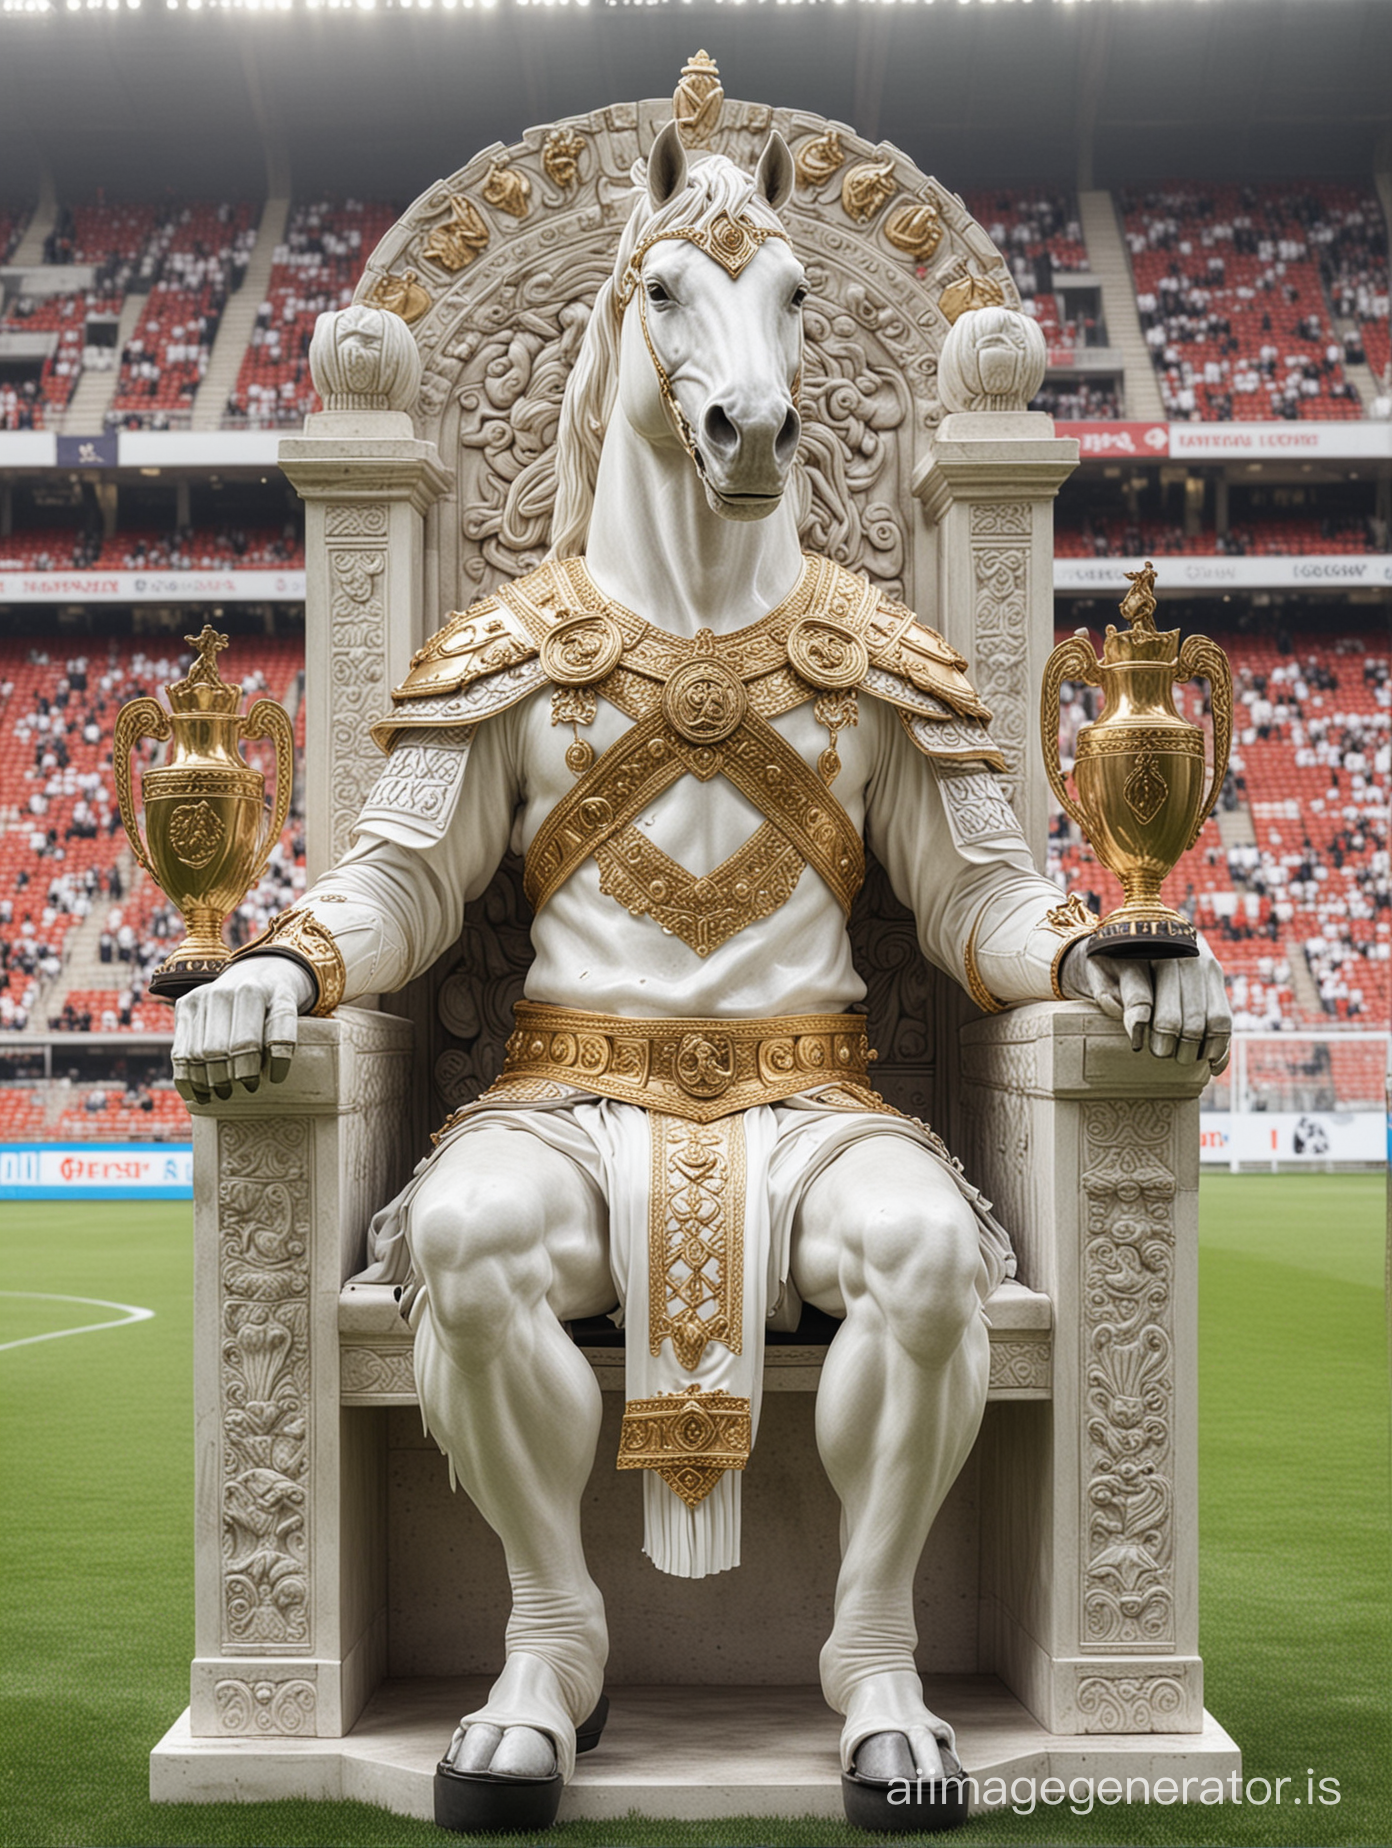 Warrior king with horse head (white colour) seating to throne holding trophies at the middle of a soccer stadium